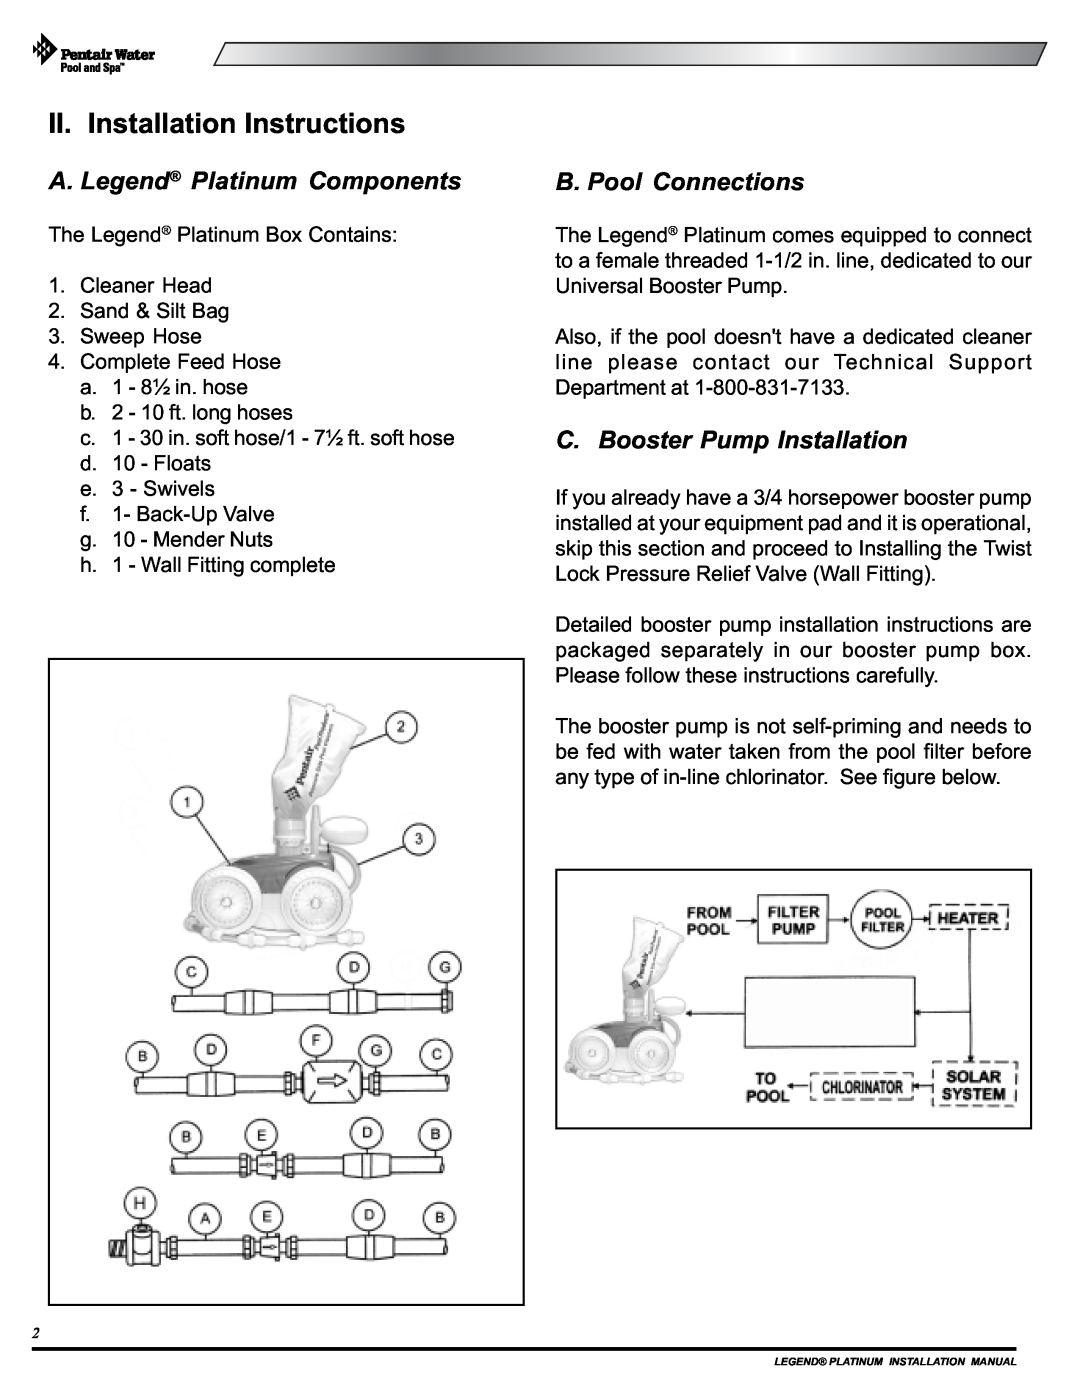 Pentair Side Pool Cleaner II. Installation Instructions, A. Legend Platinum Components, B. Pool Connections 